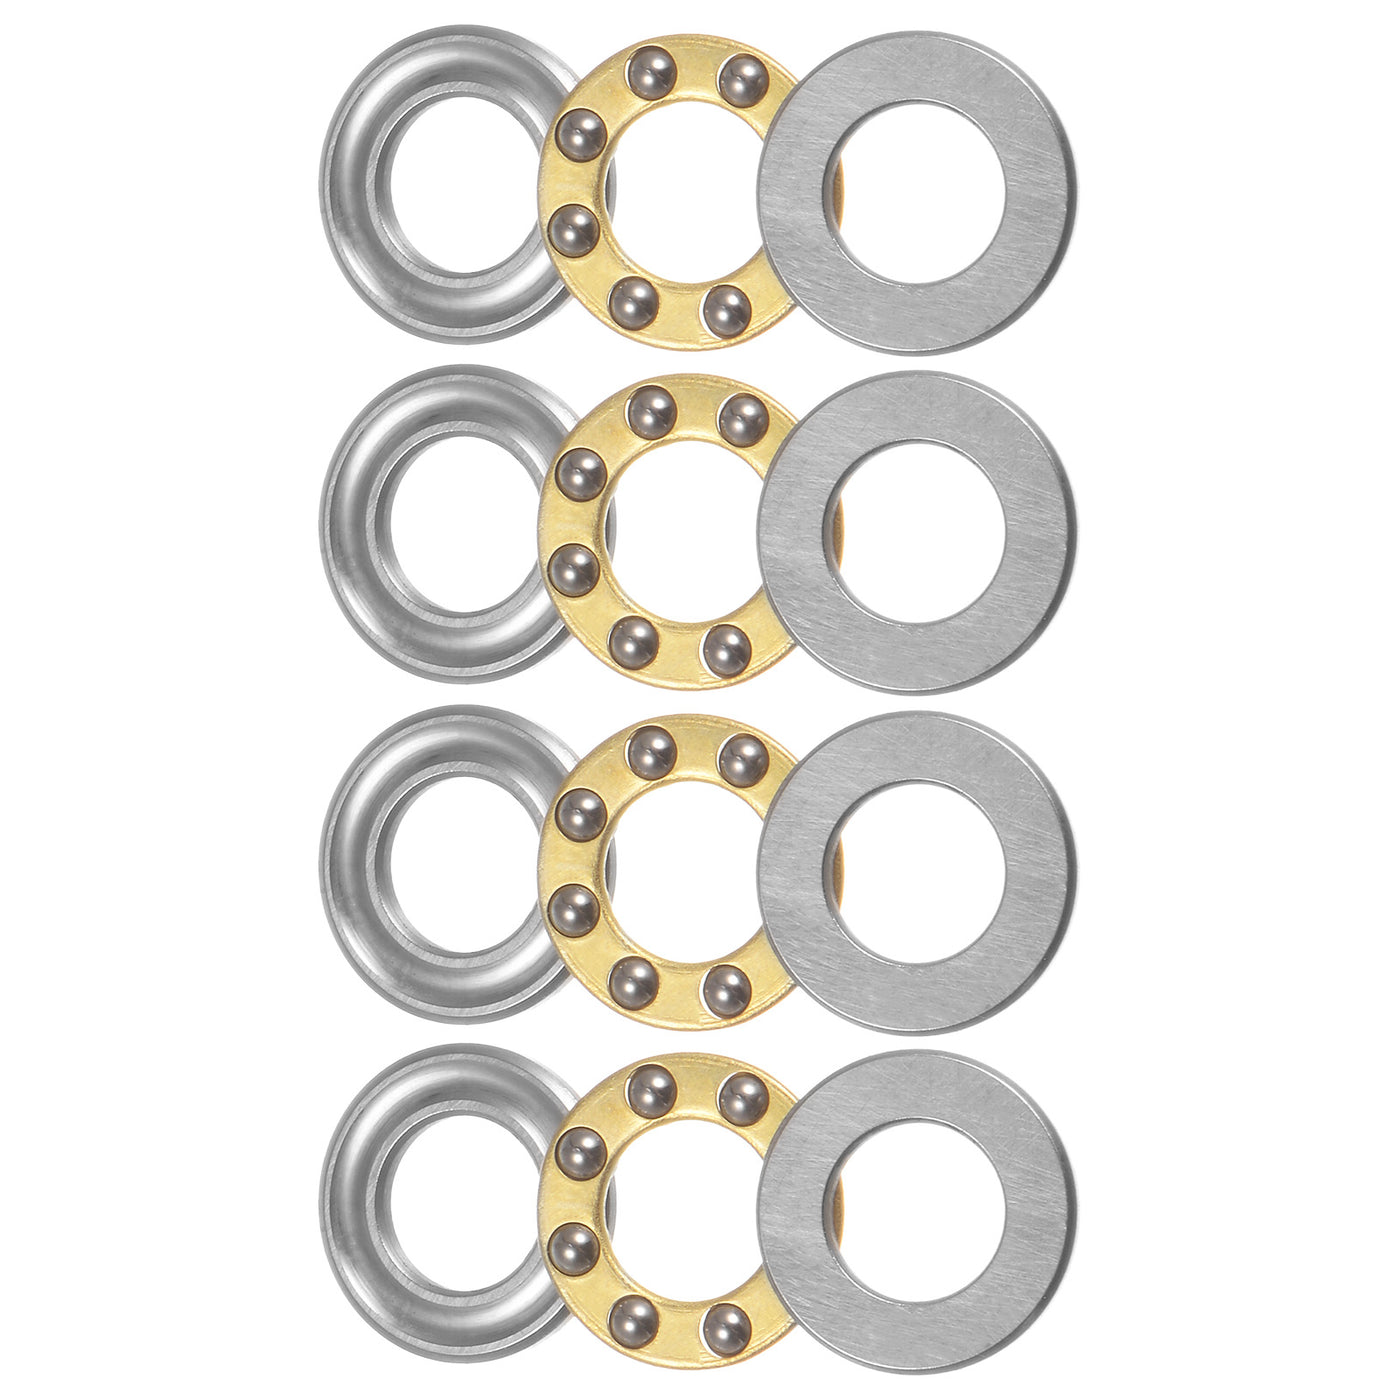 uxcell Uxcell F7-13M Thrust Ball Bearing 7x13x5mm Brass with Washers 4pcs